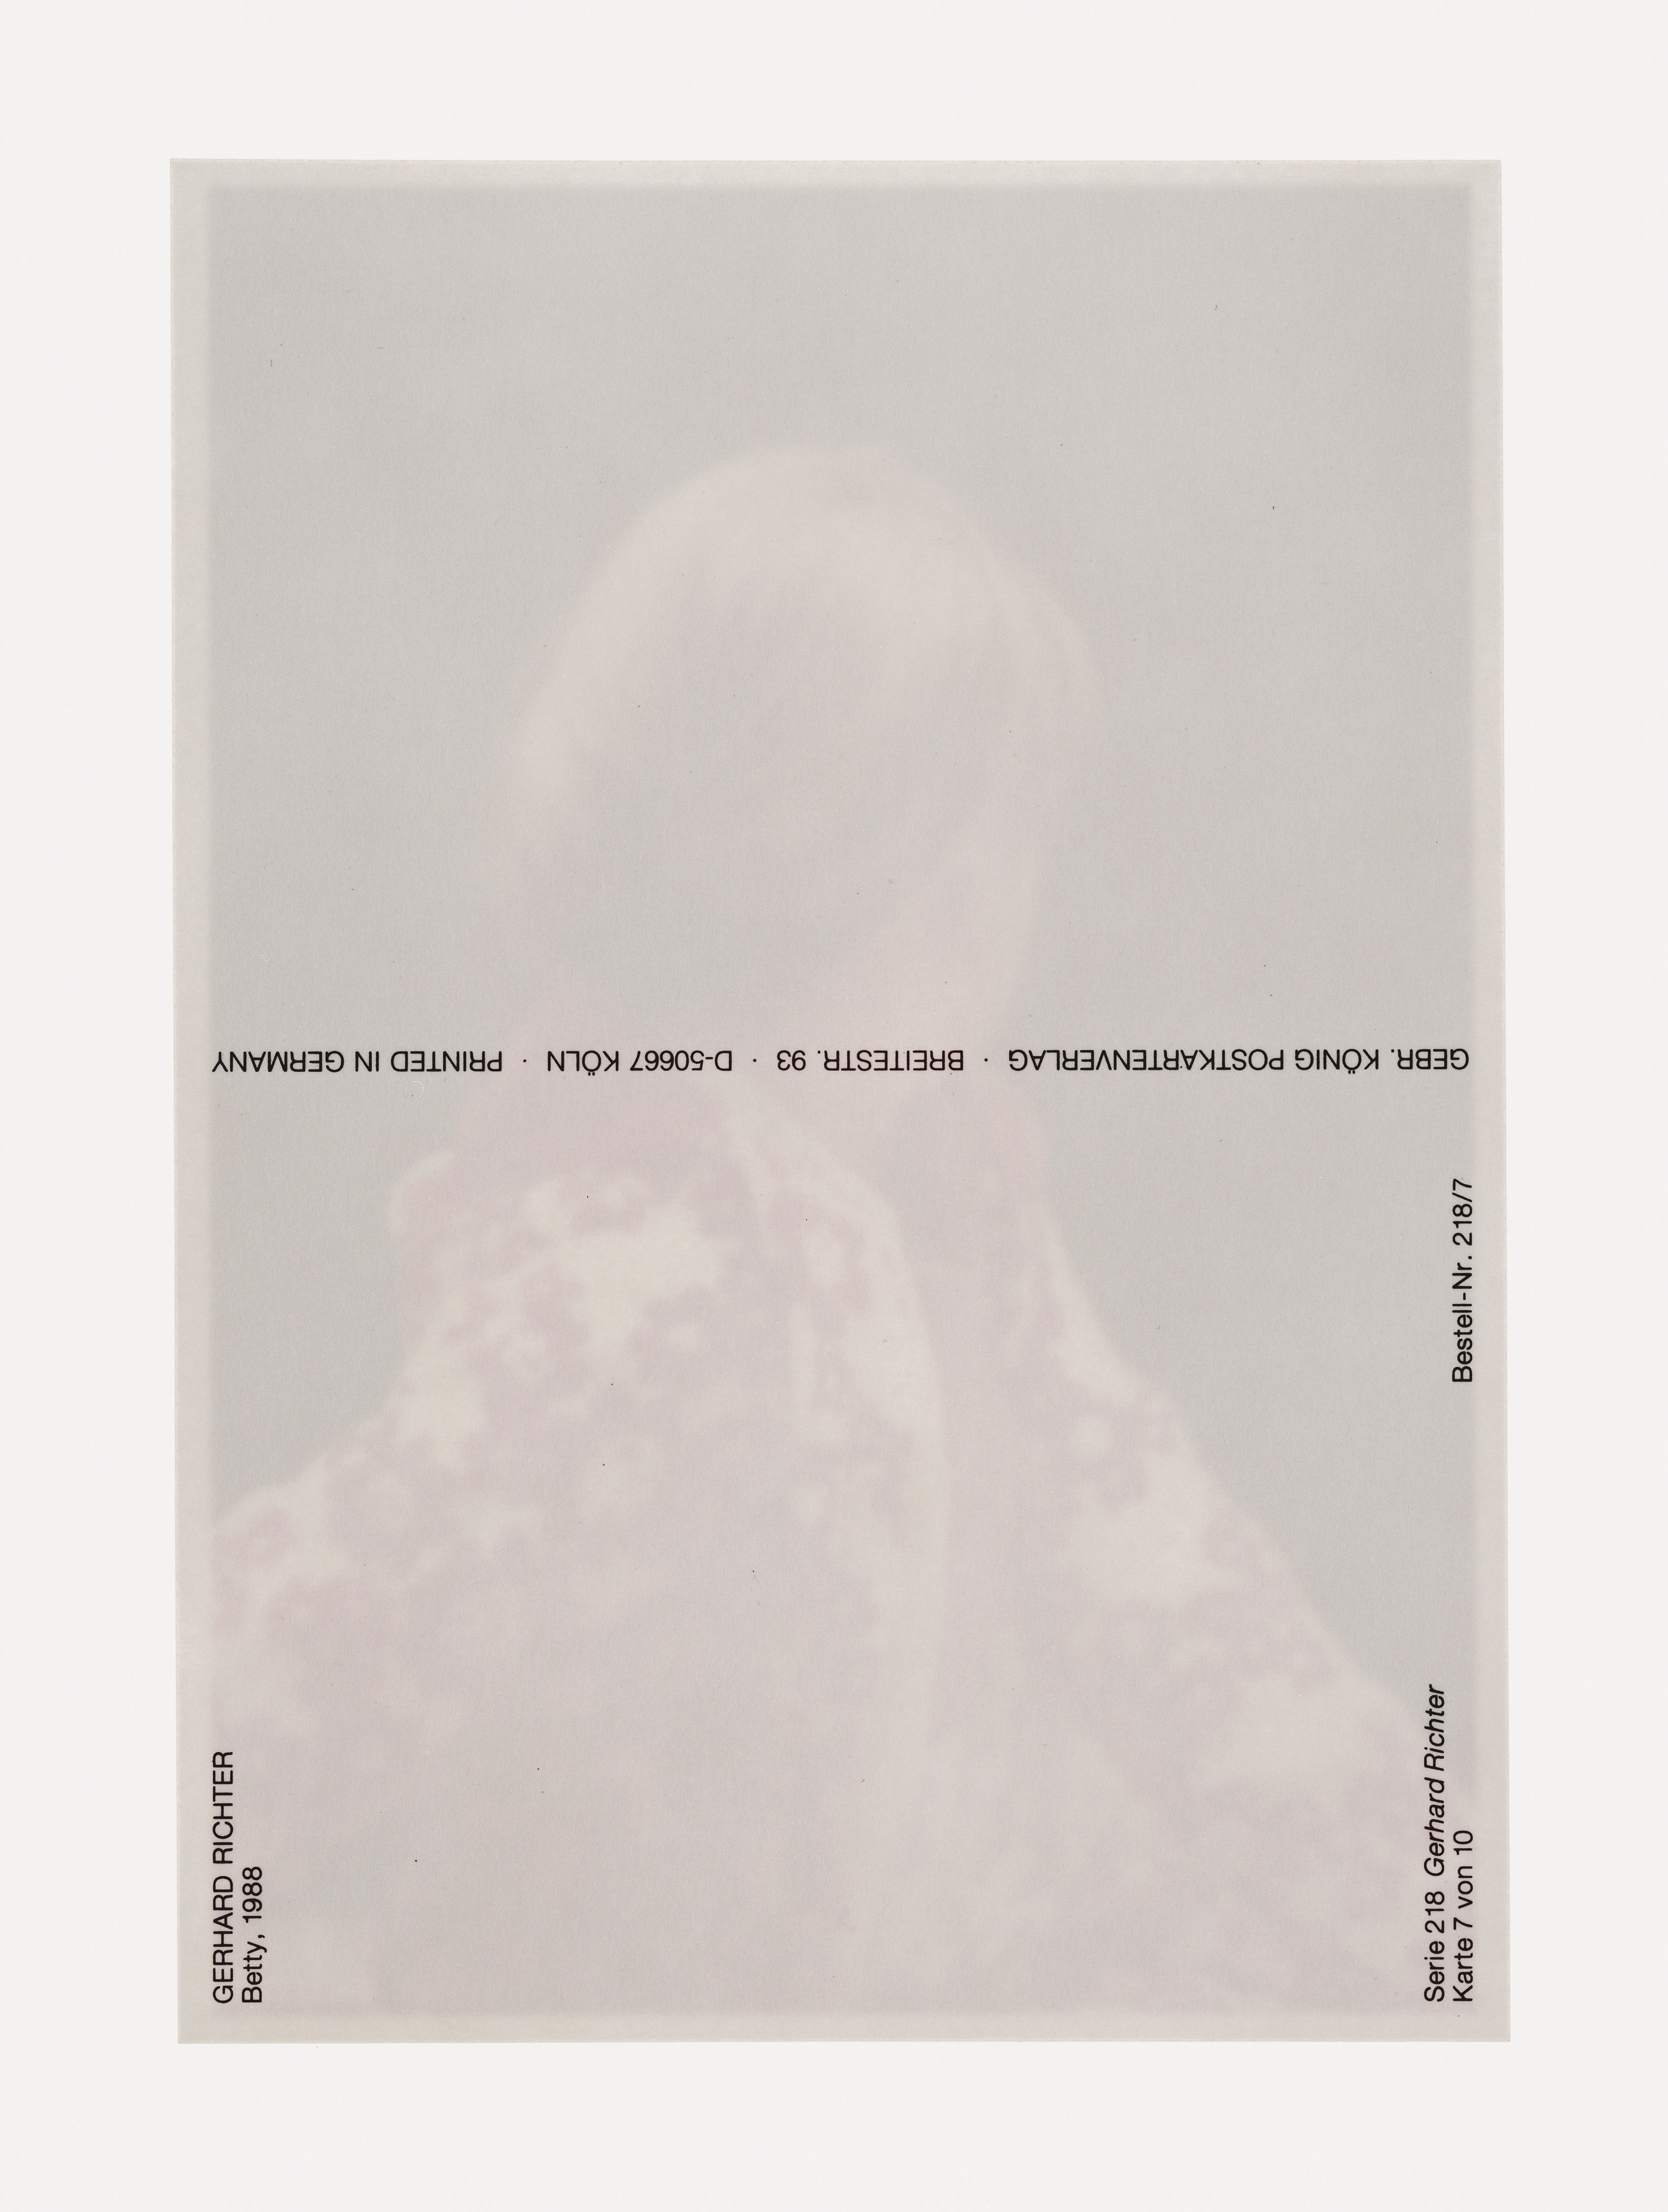 Photo-Poetics: An Anthology | The Guggenheim Museums and Foundation